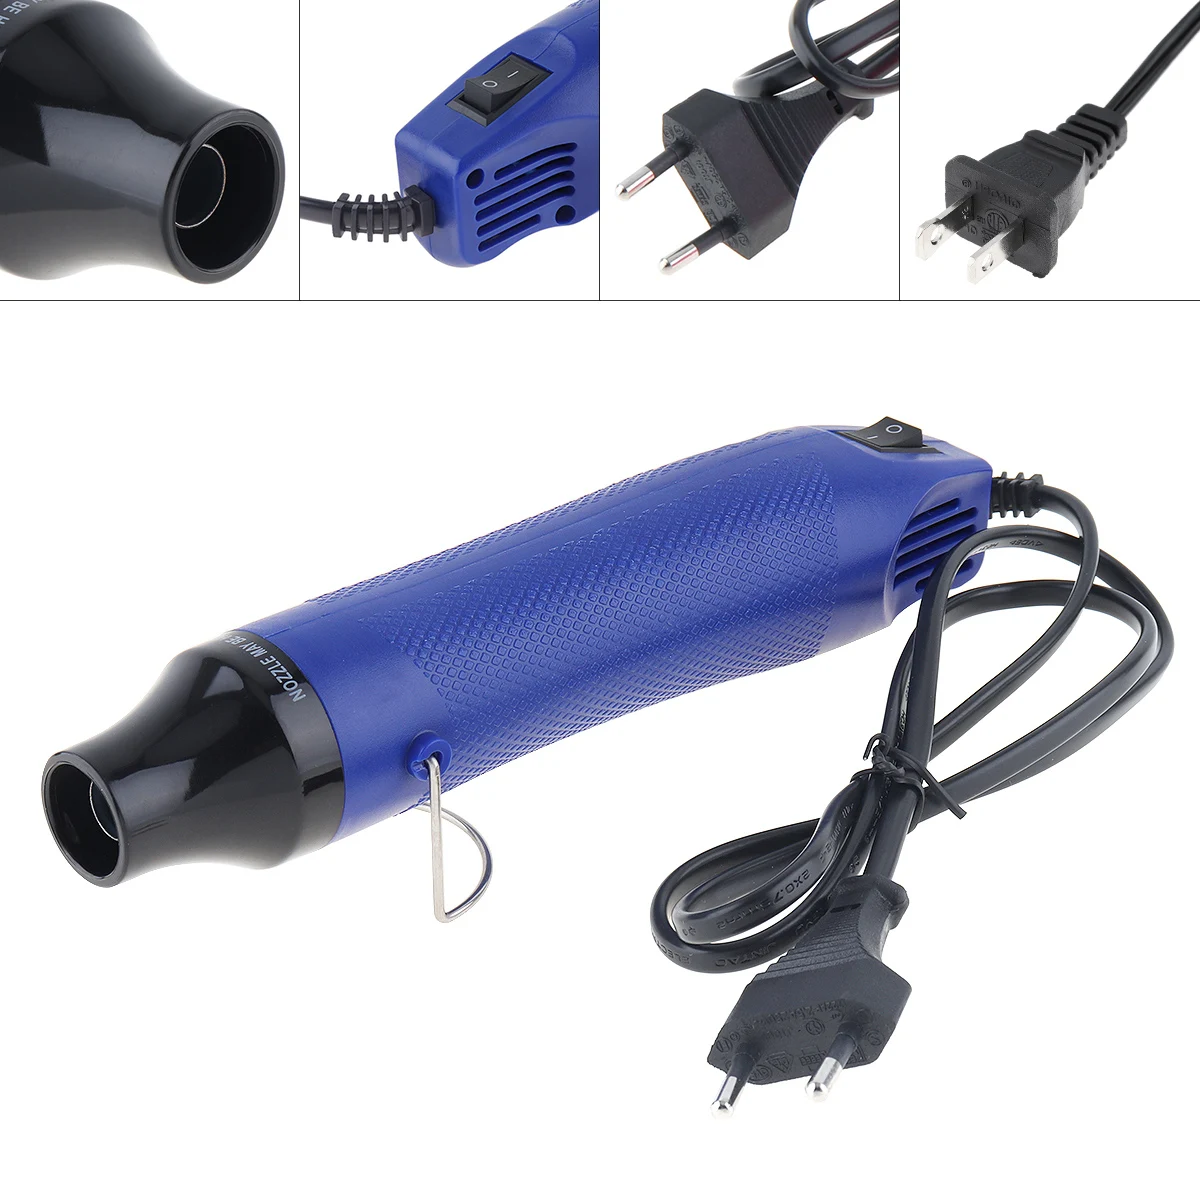 110V / 220V 300W Heat Gun Electric Blower Handmade with Shrink Plastic Surface and EU / US Plug for Heating DIY Accessories 110v us plug 50w microplush washable electric heating pad foot warmer mat for feet heated electr heat pads botties winter warmer